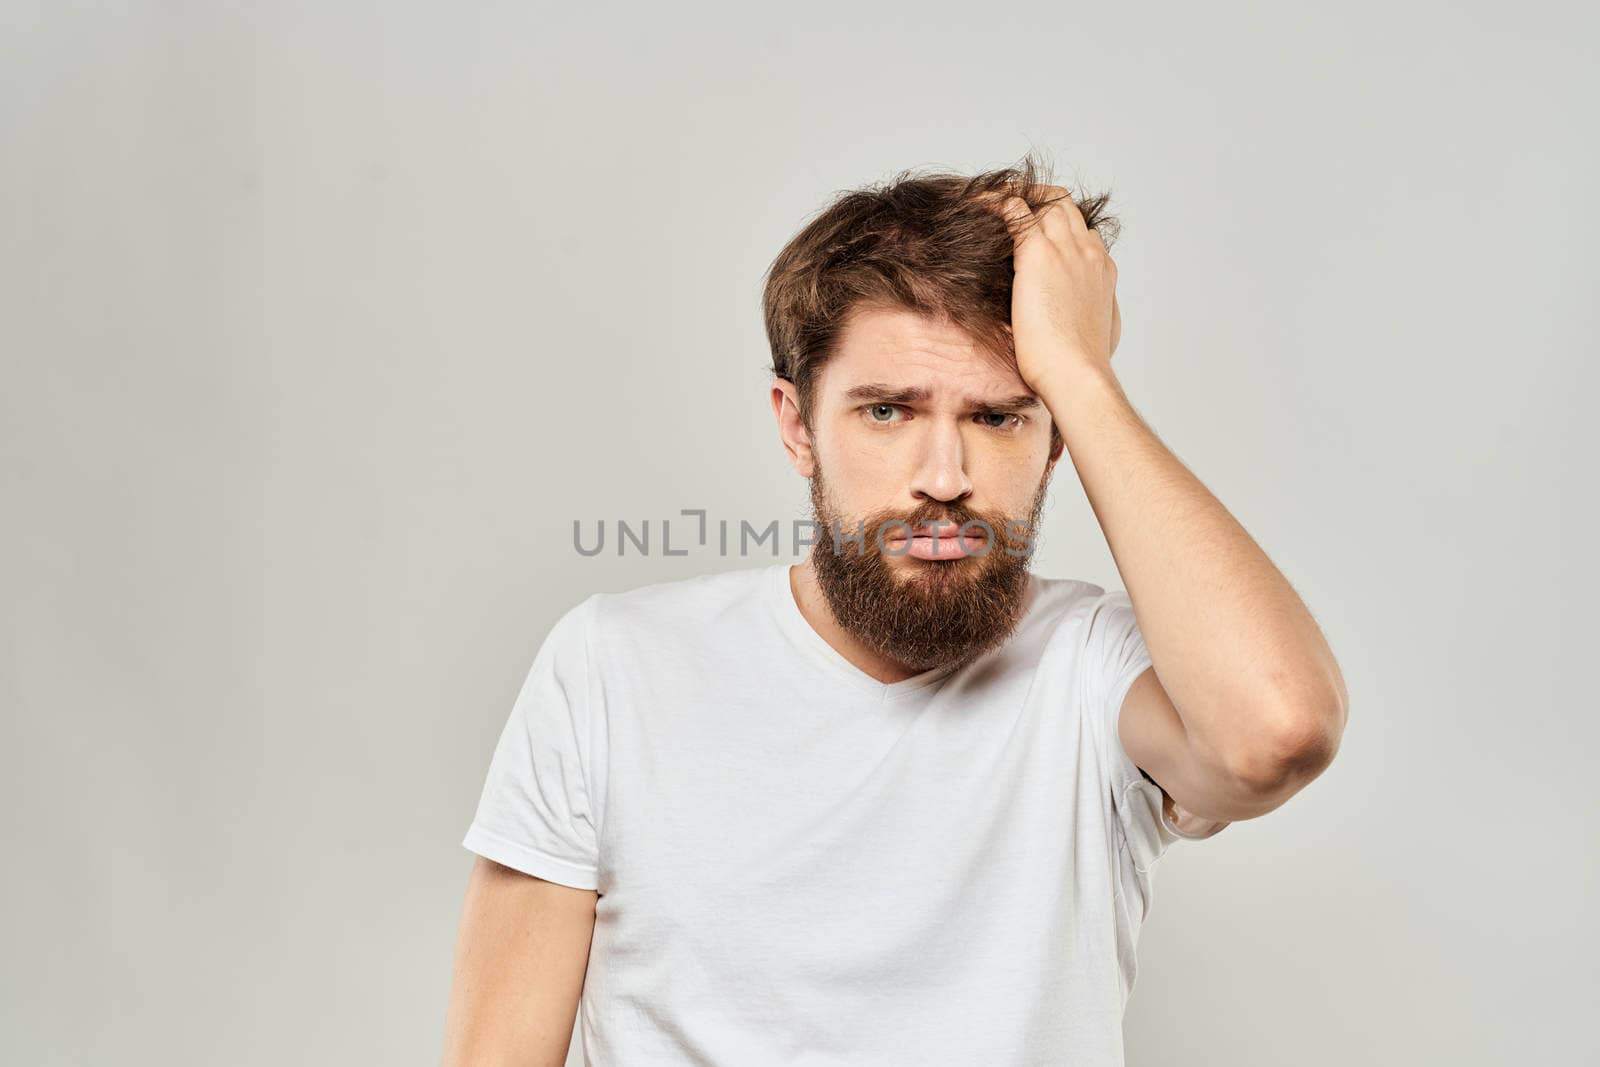 man in white t-shirt gesturing with his hands studio dissatisfaction lifestyle light background by SHOTPRIME